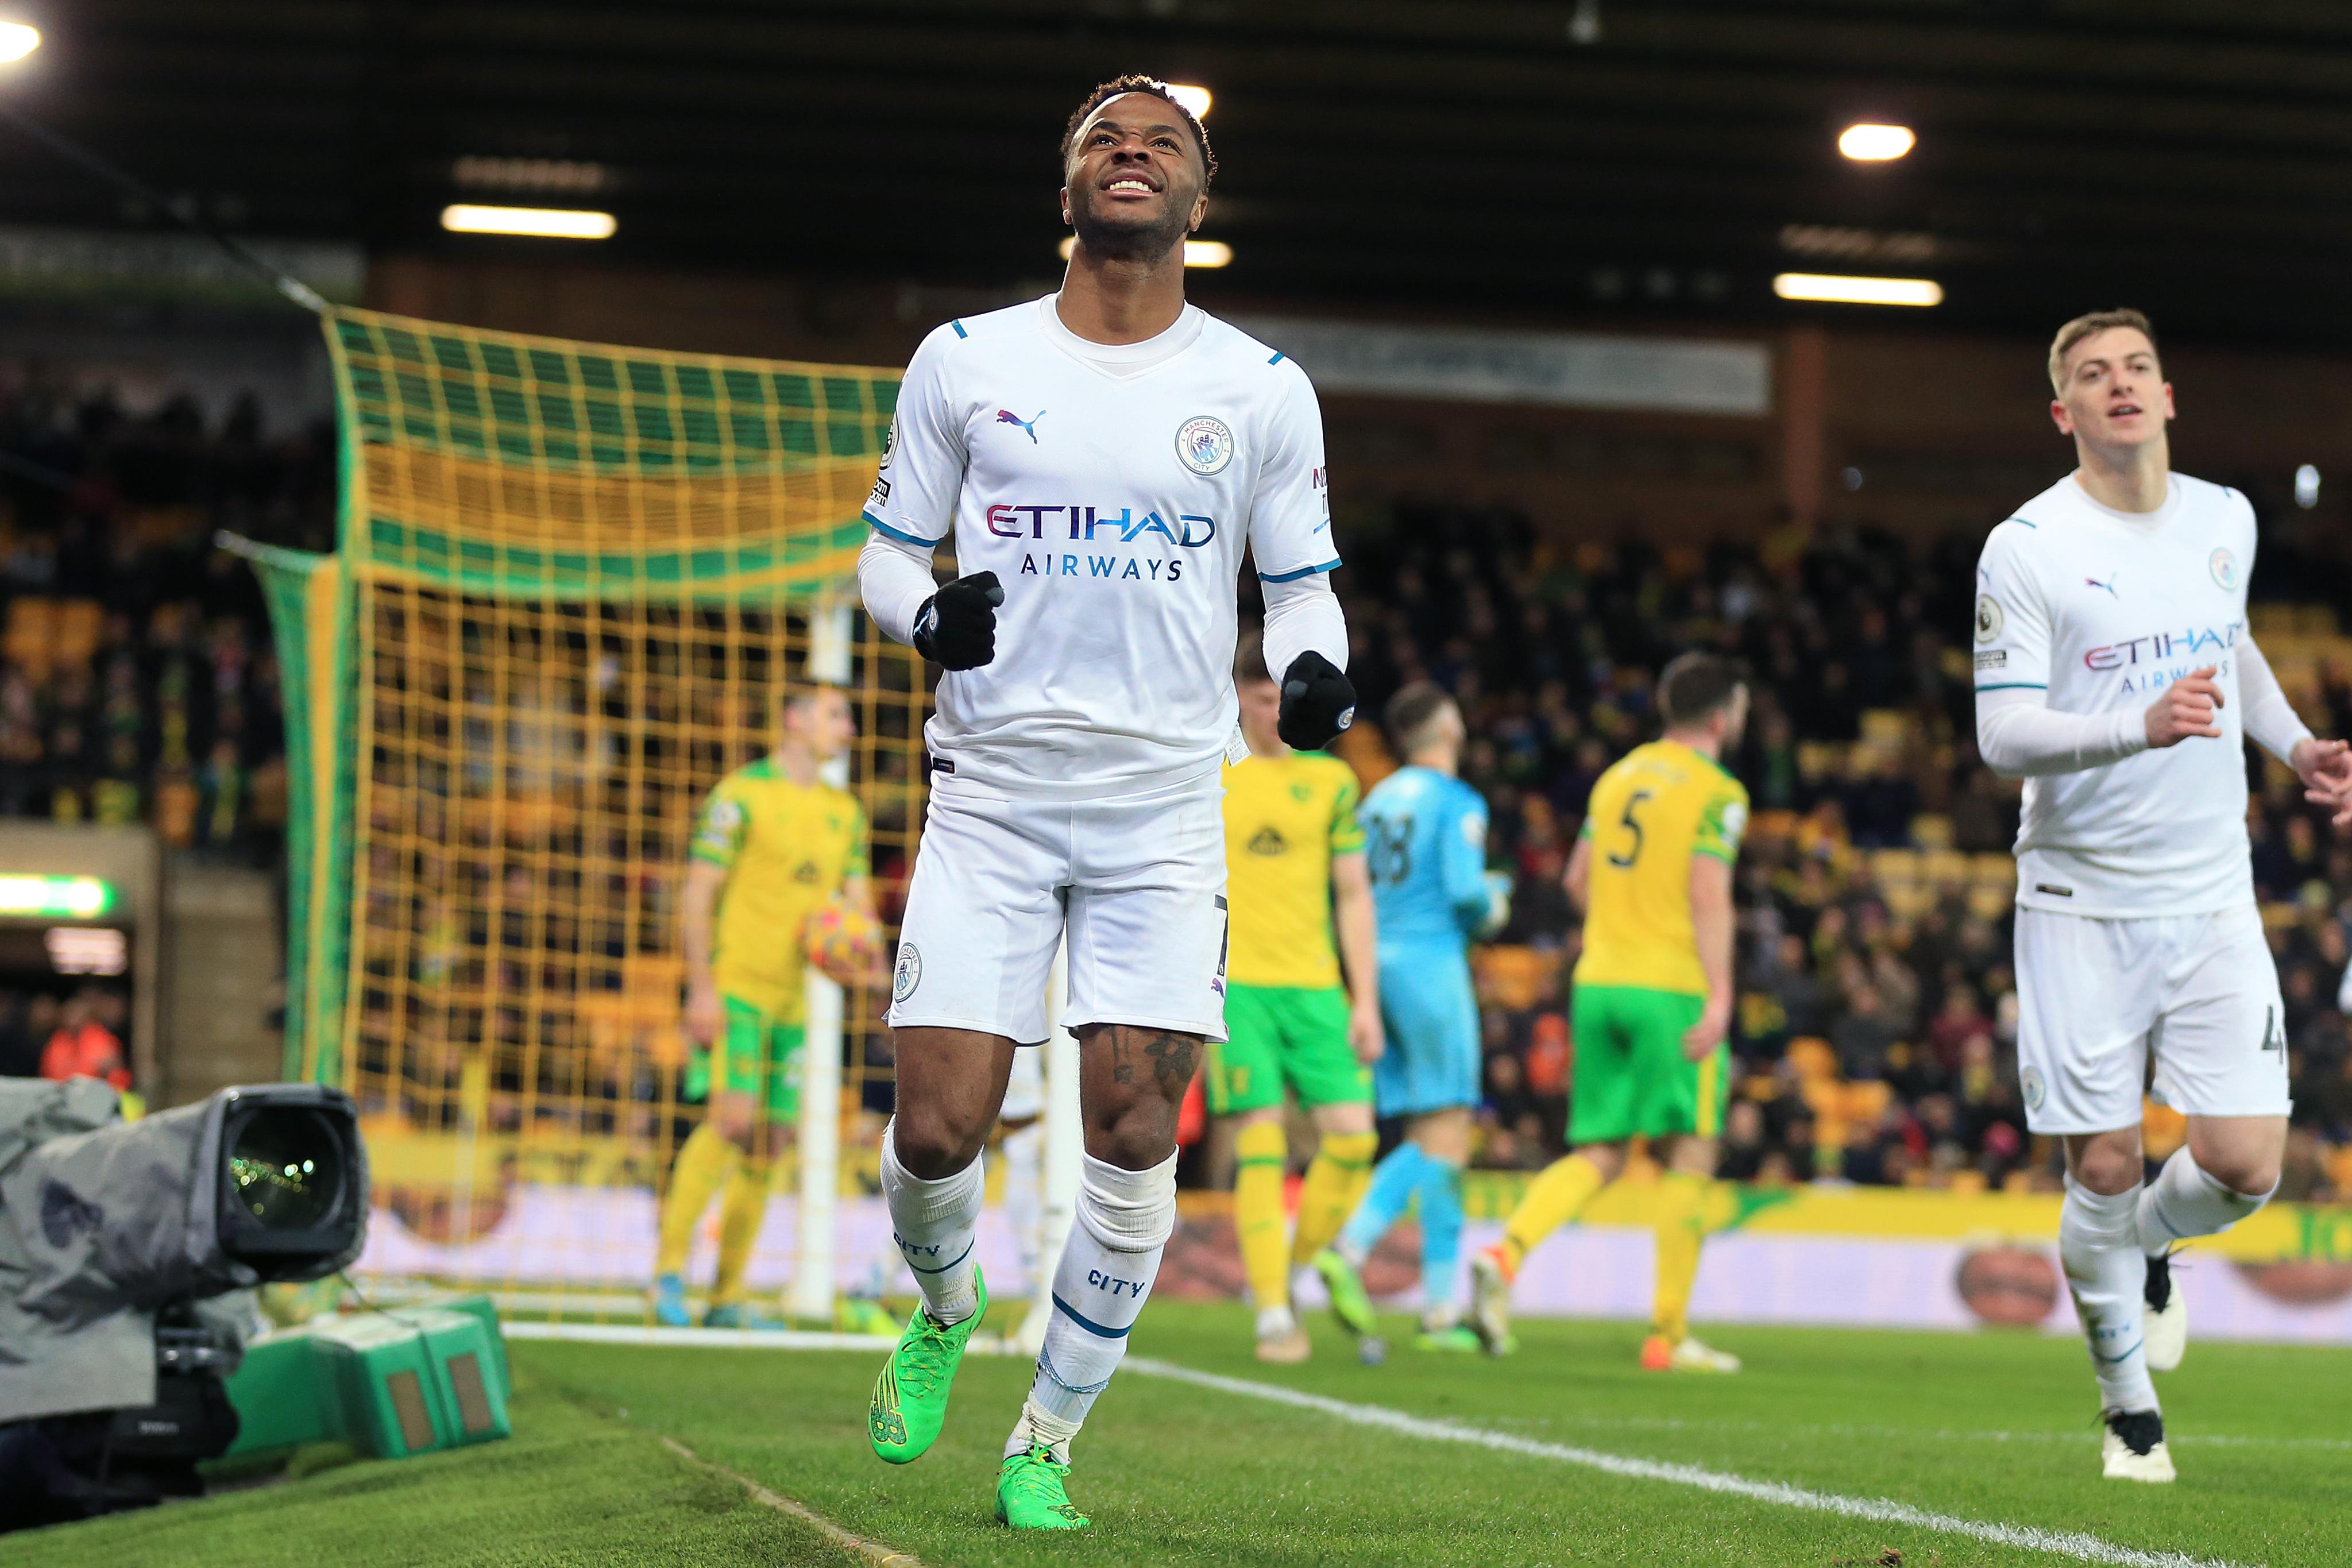 Norwich 0-4 Manchester City Highlights: Raheem Sterling's hattrick helps Manchester City beat Norwich City as they go 12 points clear at the top